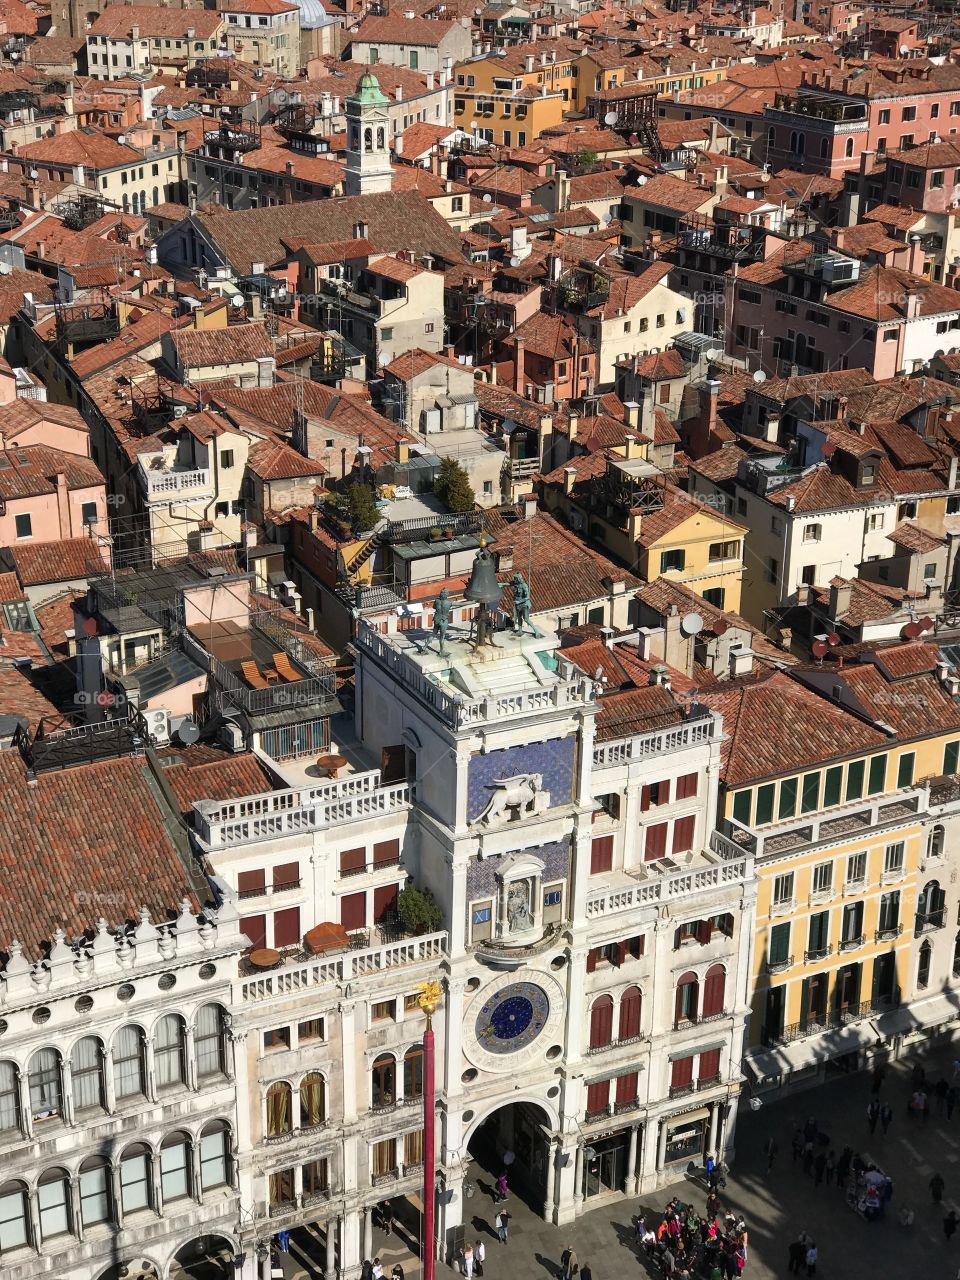 Venice from up